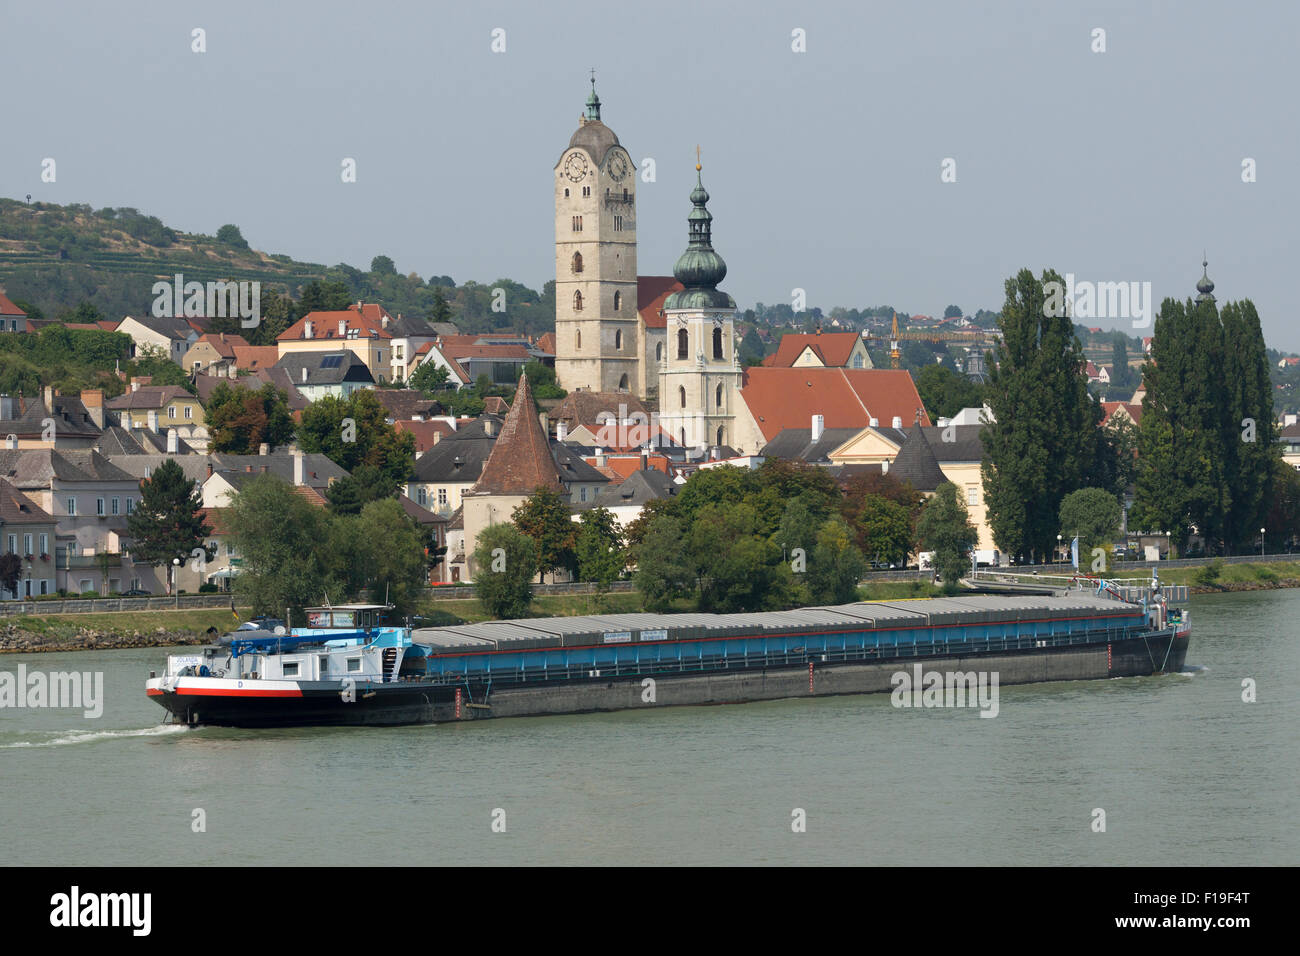 A commercial barge carrying goods passing by Stein an der Donau on the River Danube in Lower Austria Stock Photo